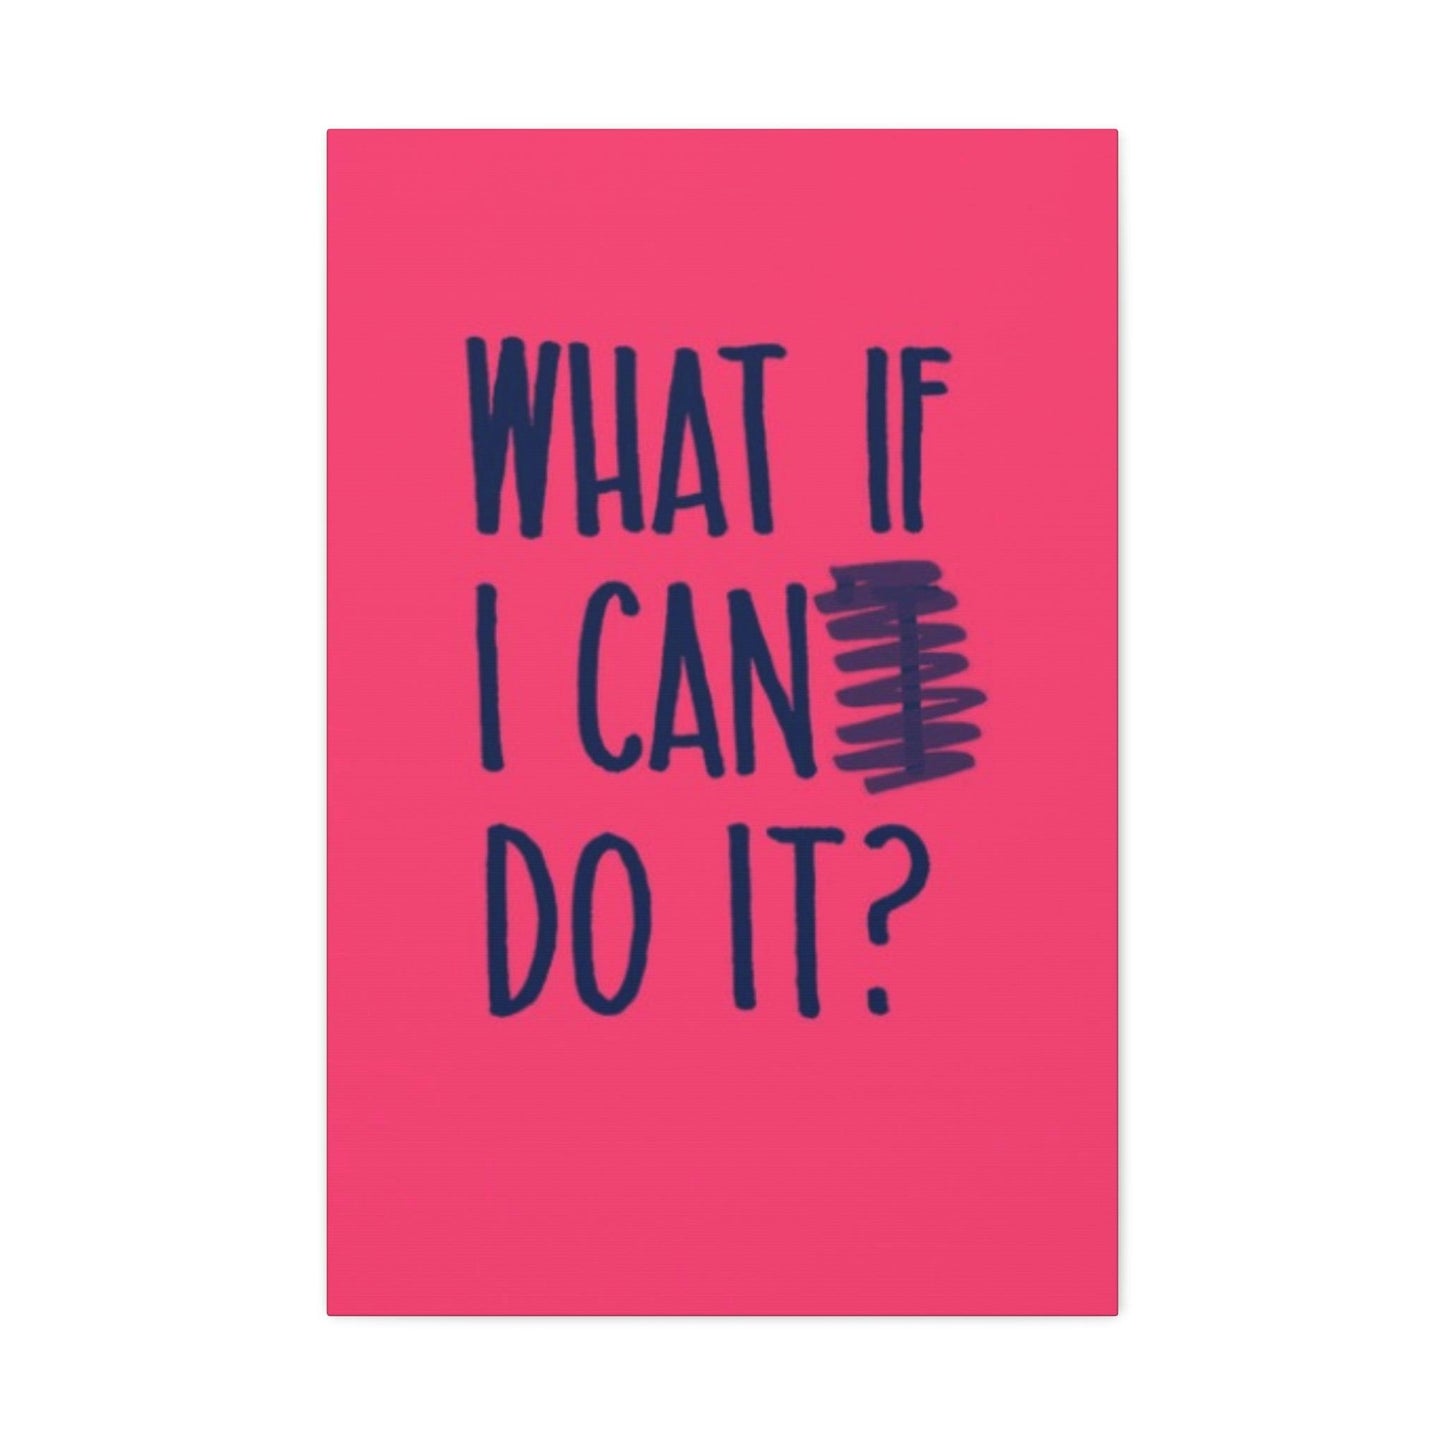 You can do it. - DECOROOM